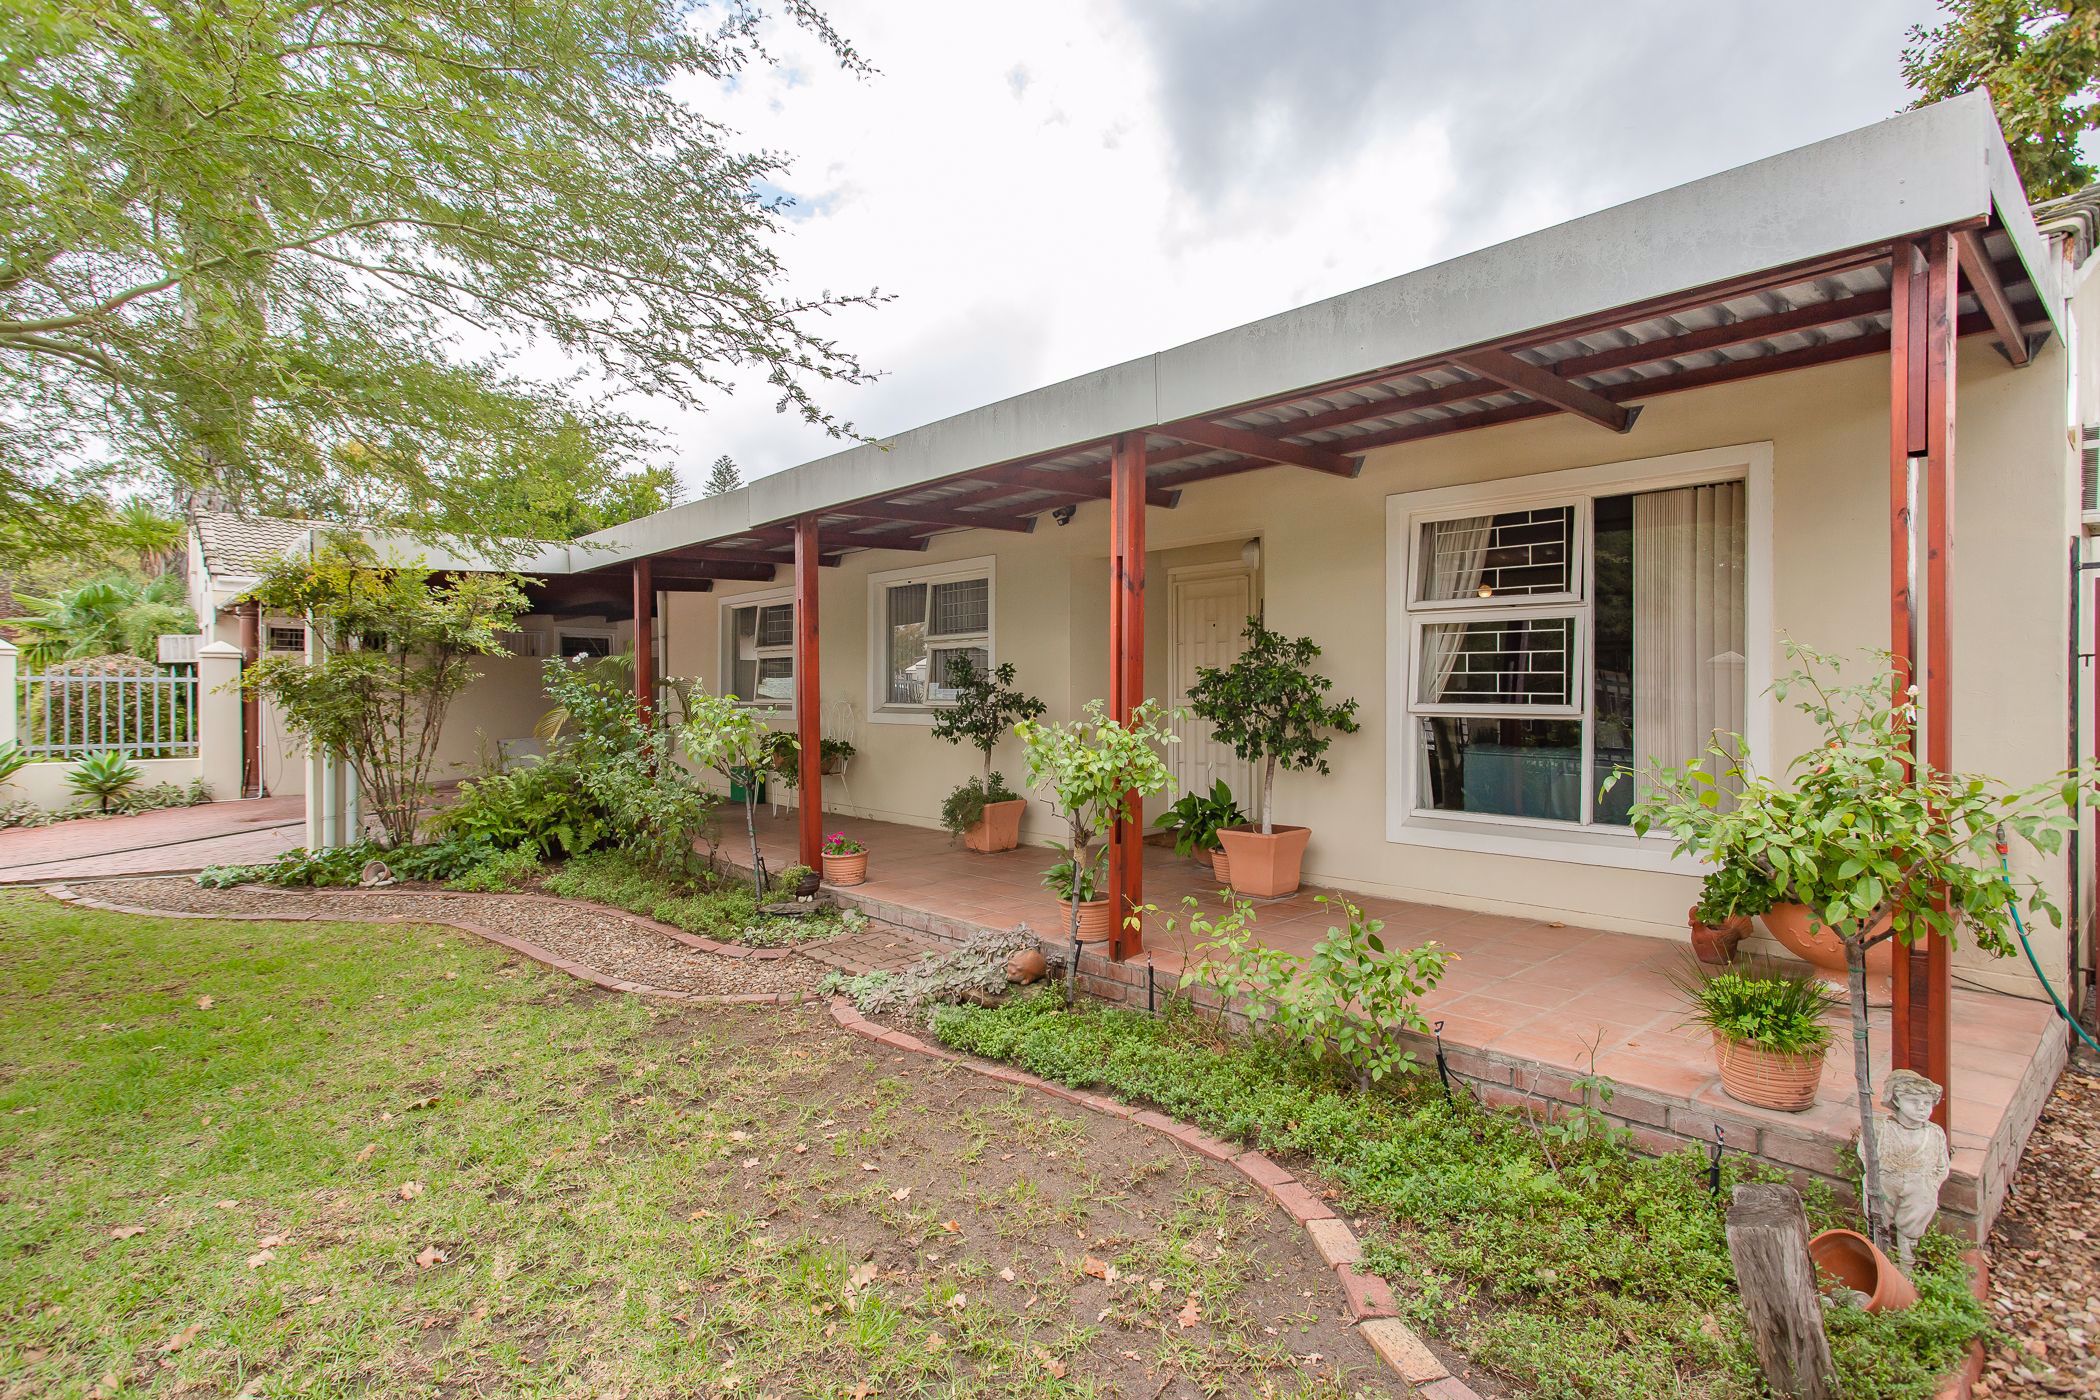 3 bedroom house for sale in Paarl